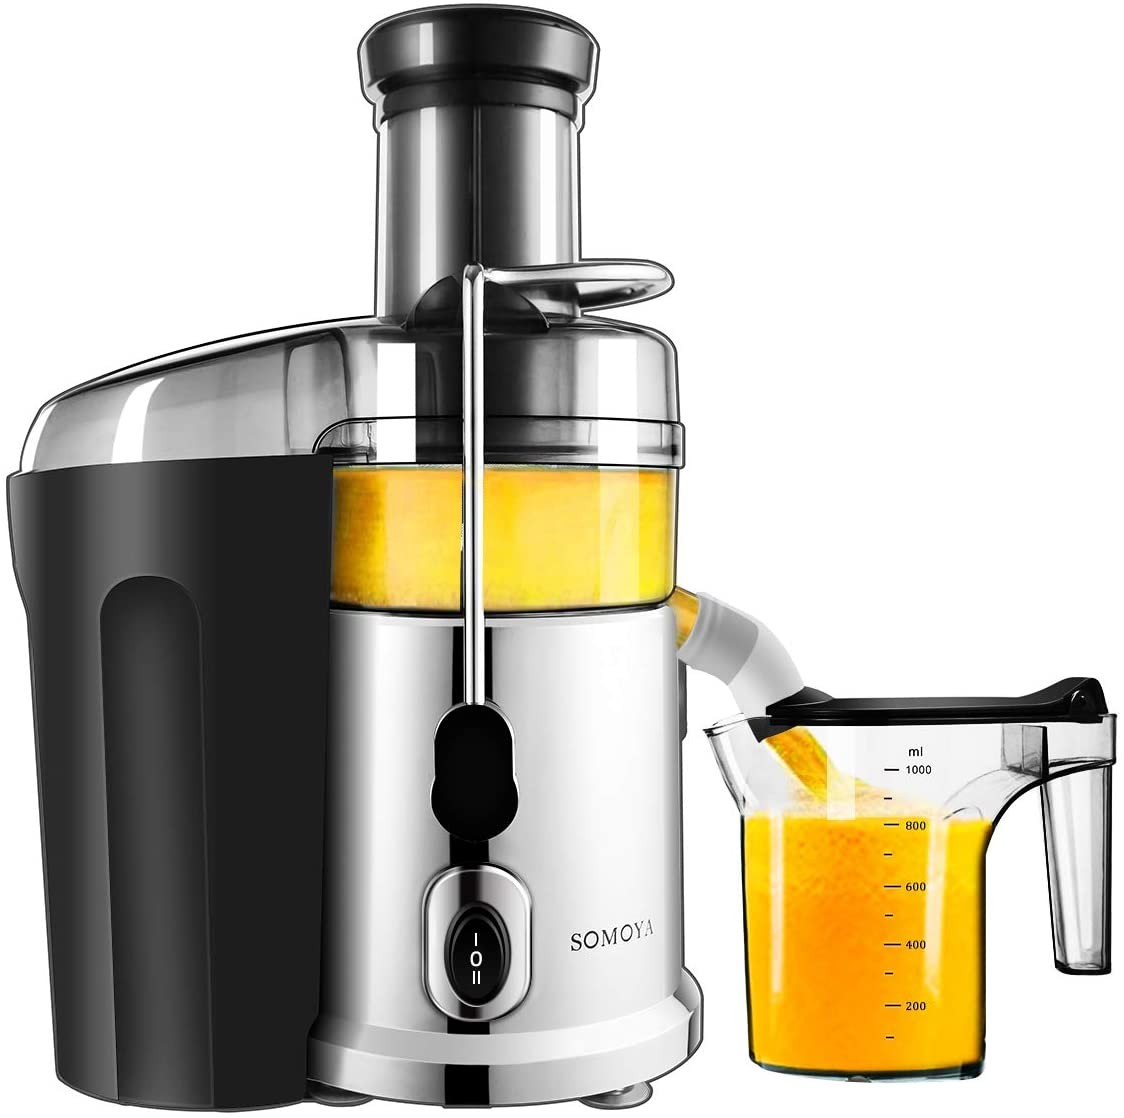 Juice Machine SOMOYA 2020 Juice Extractor 700W High Speed Stainless Steel Centrifugal Juicer Easy Cl